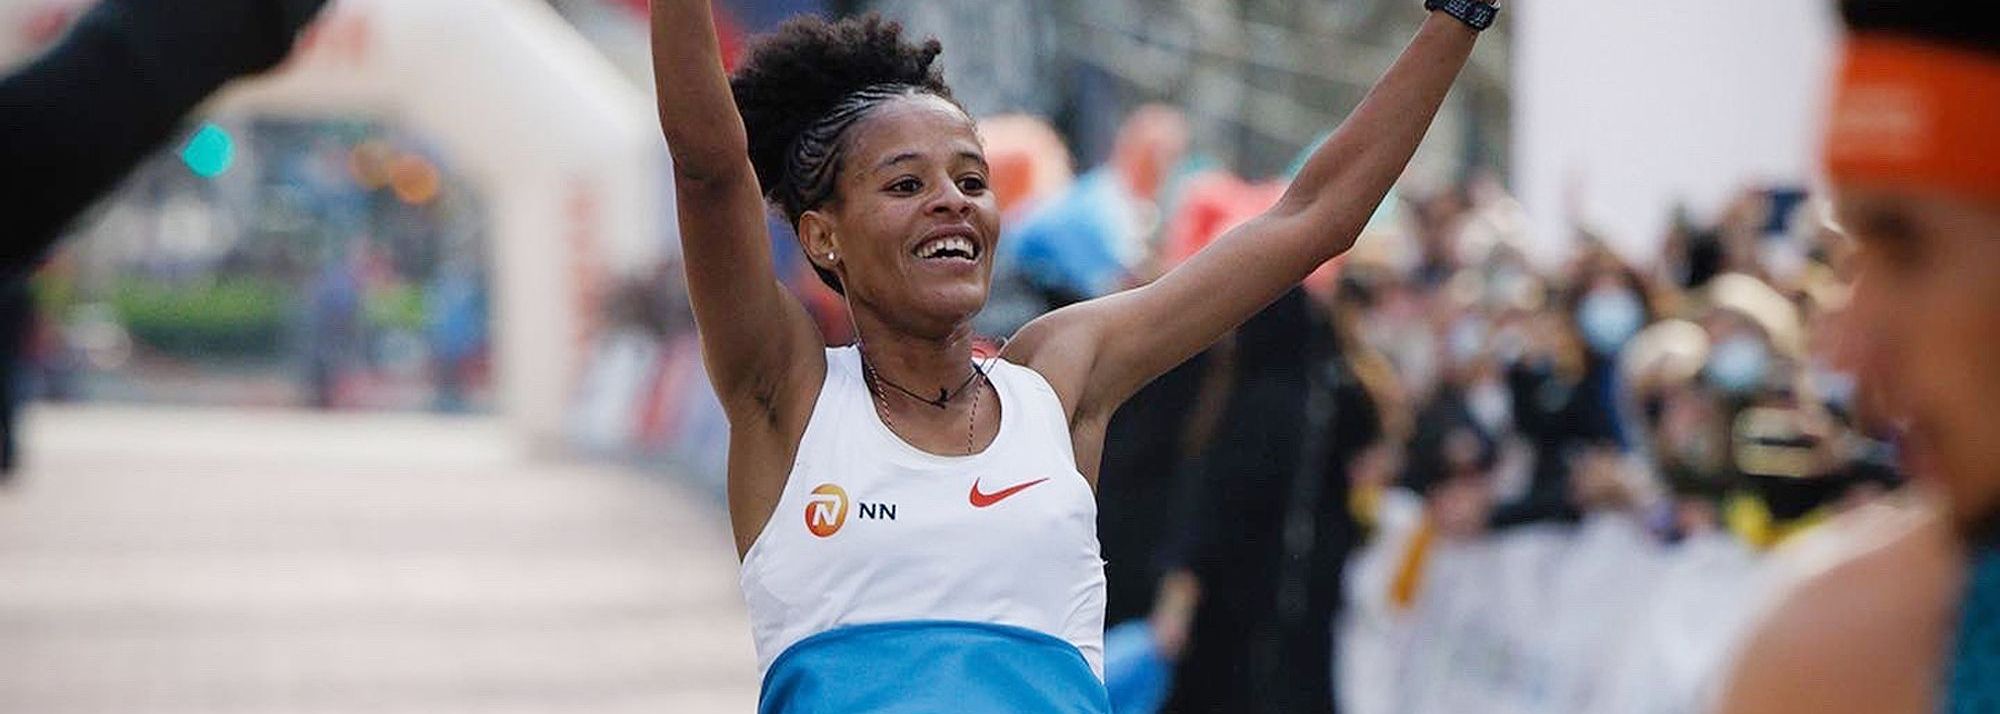 Ethiopia’s Yalemzerf Yehualaw will try to break her own world 10km record at the 10K Valencia Ibercaja